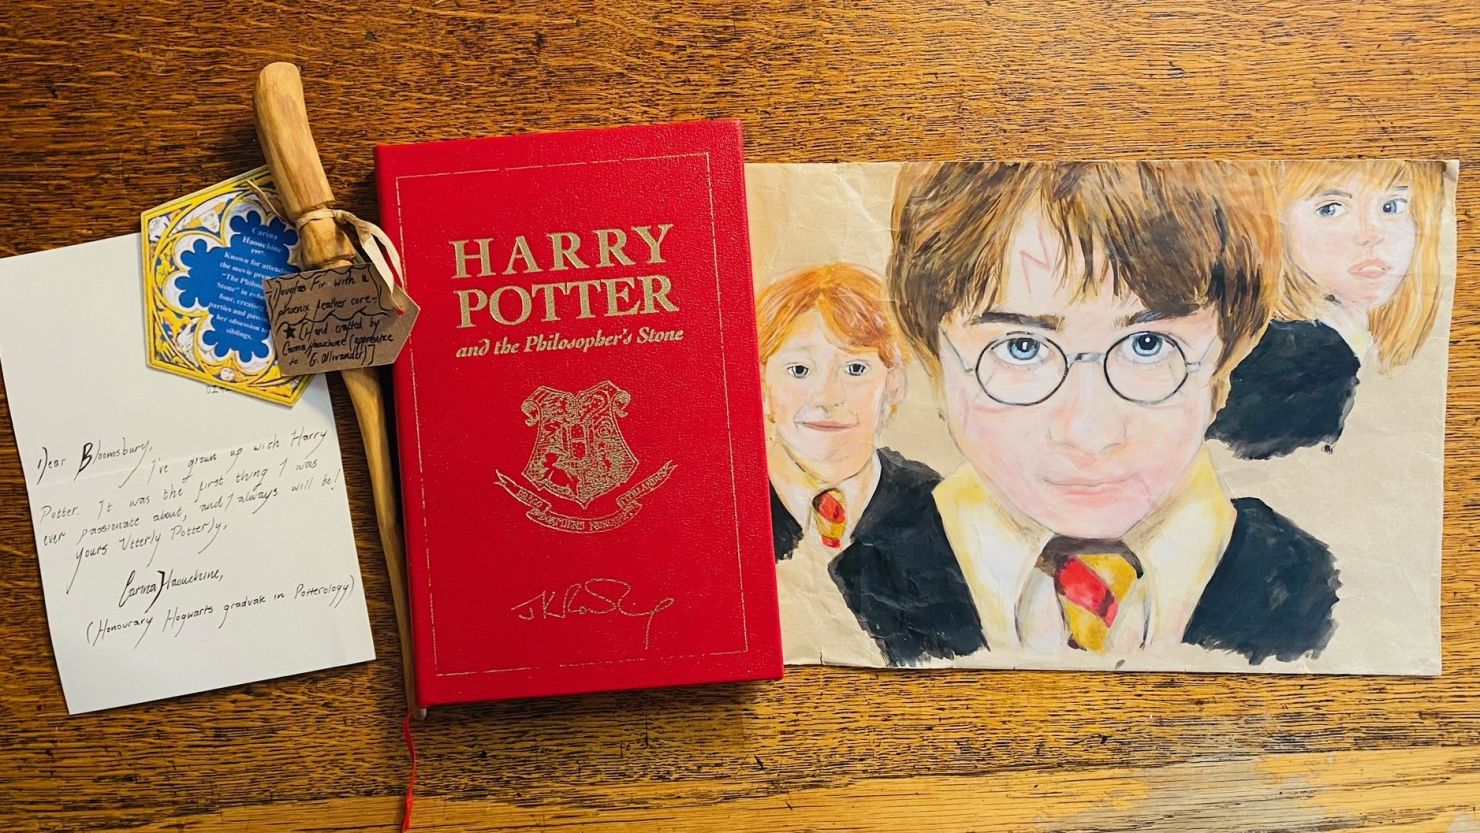 Harry Potter Boxed Set Trade Paper by J.K. Rowling